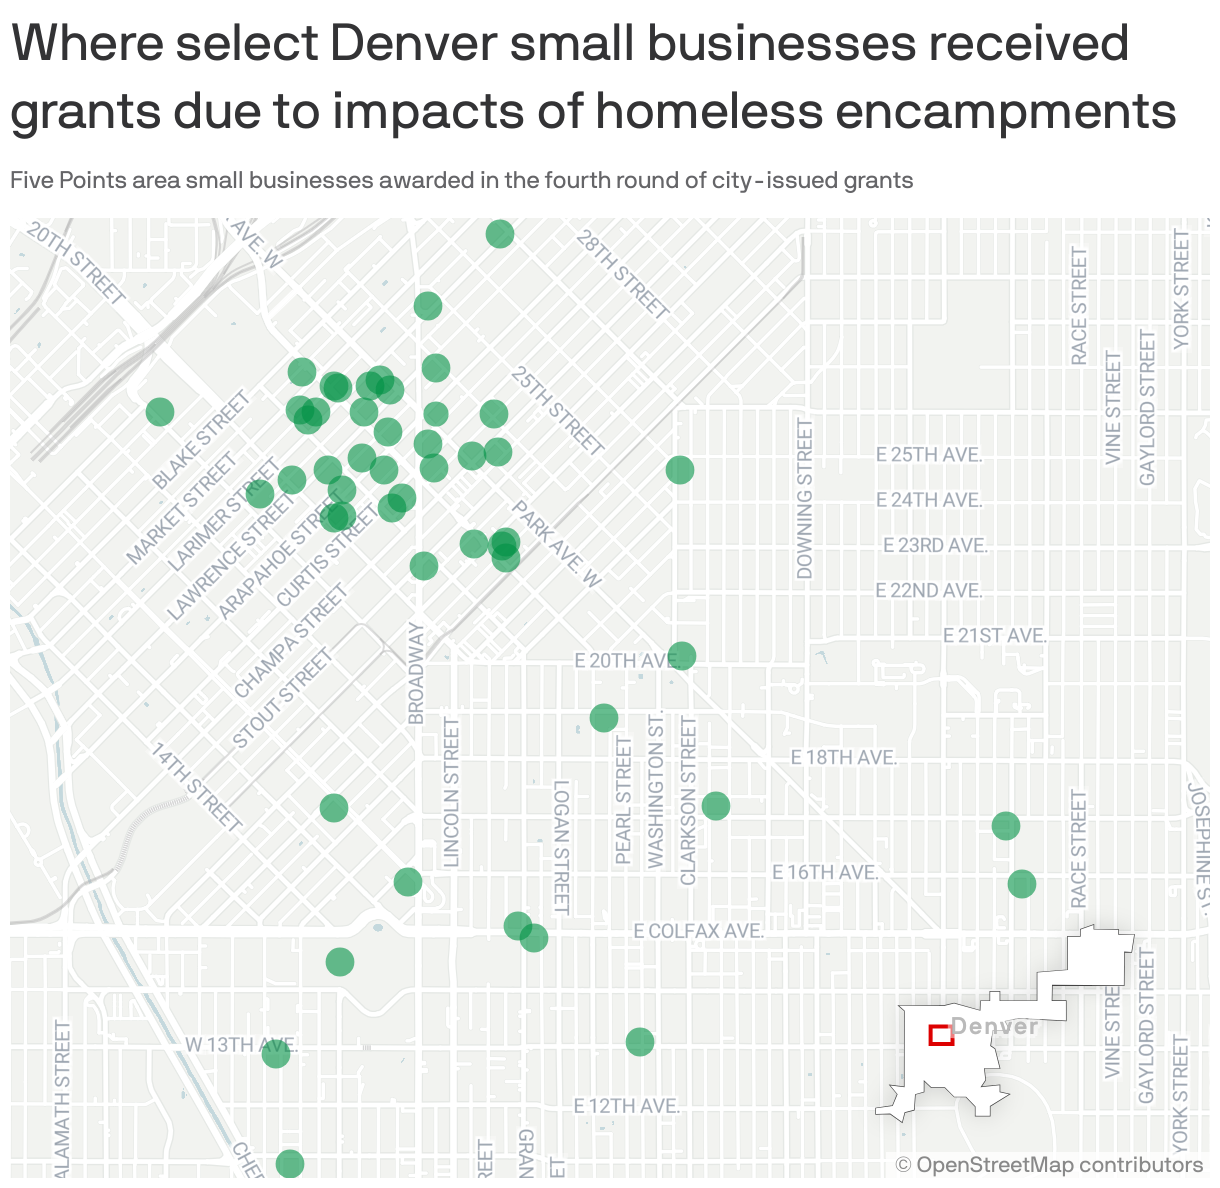 Where select Denver small businesses received grants due to impacts of homeless encampments